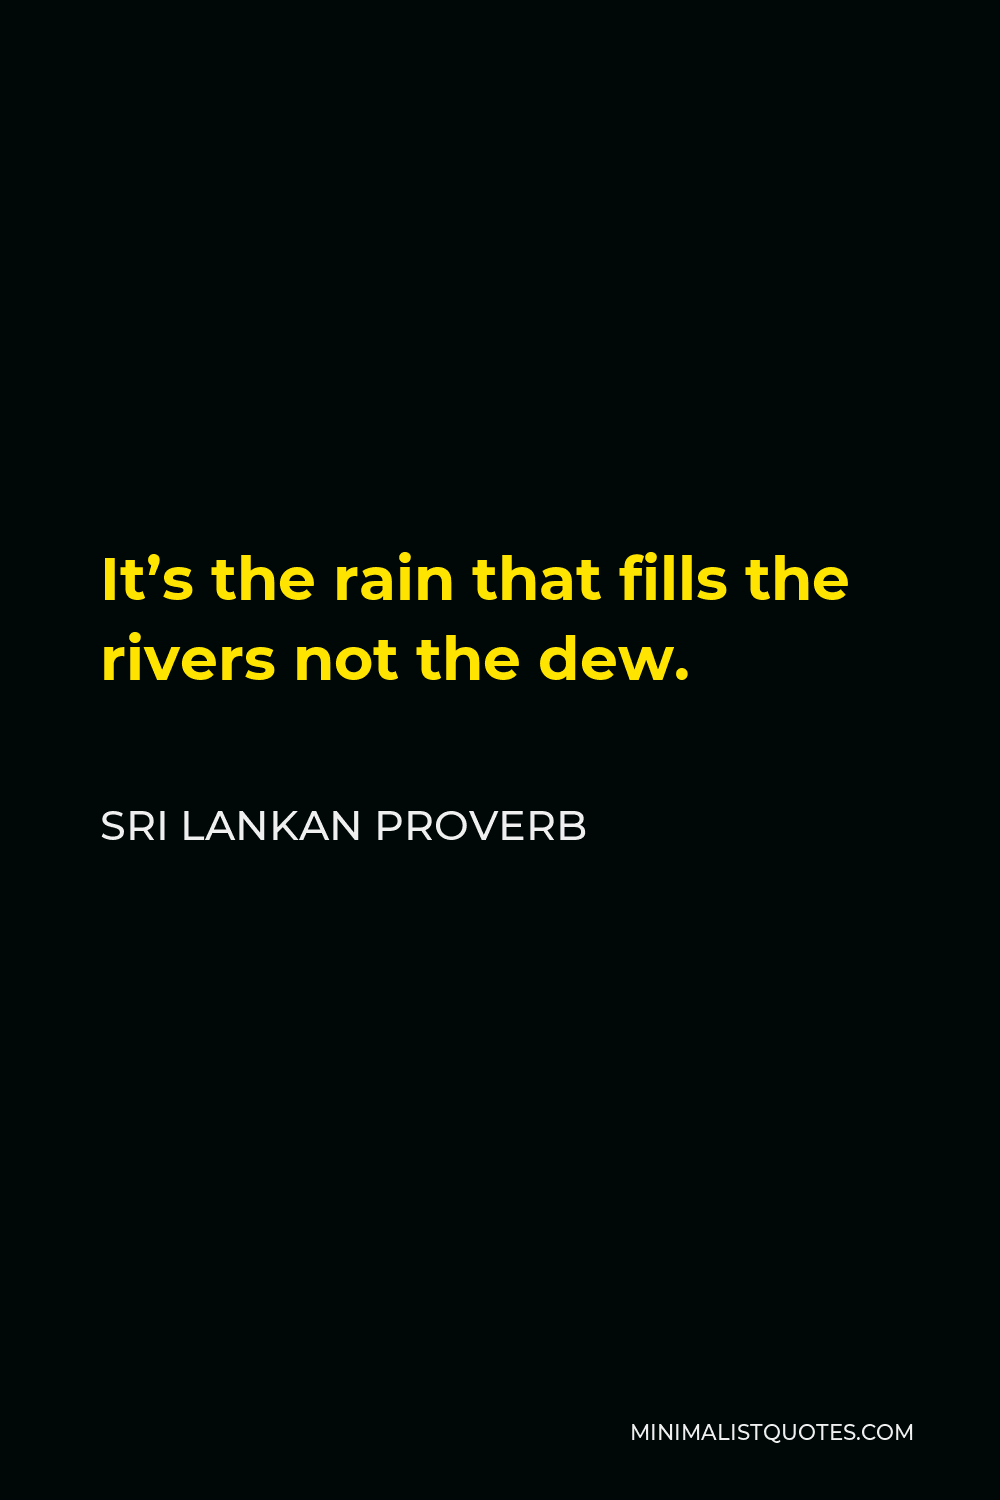 Sri Lankan Proverb Quote - It’s the rain that fills the rivers not the dew.